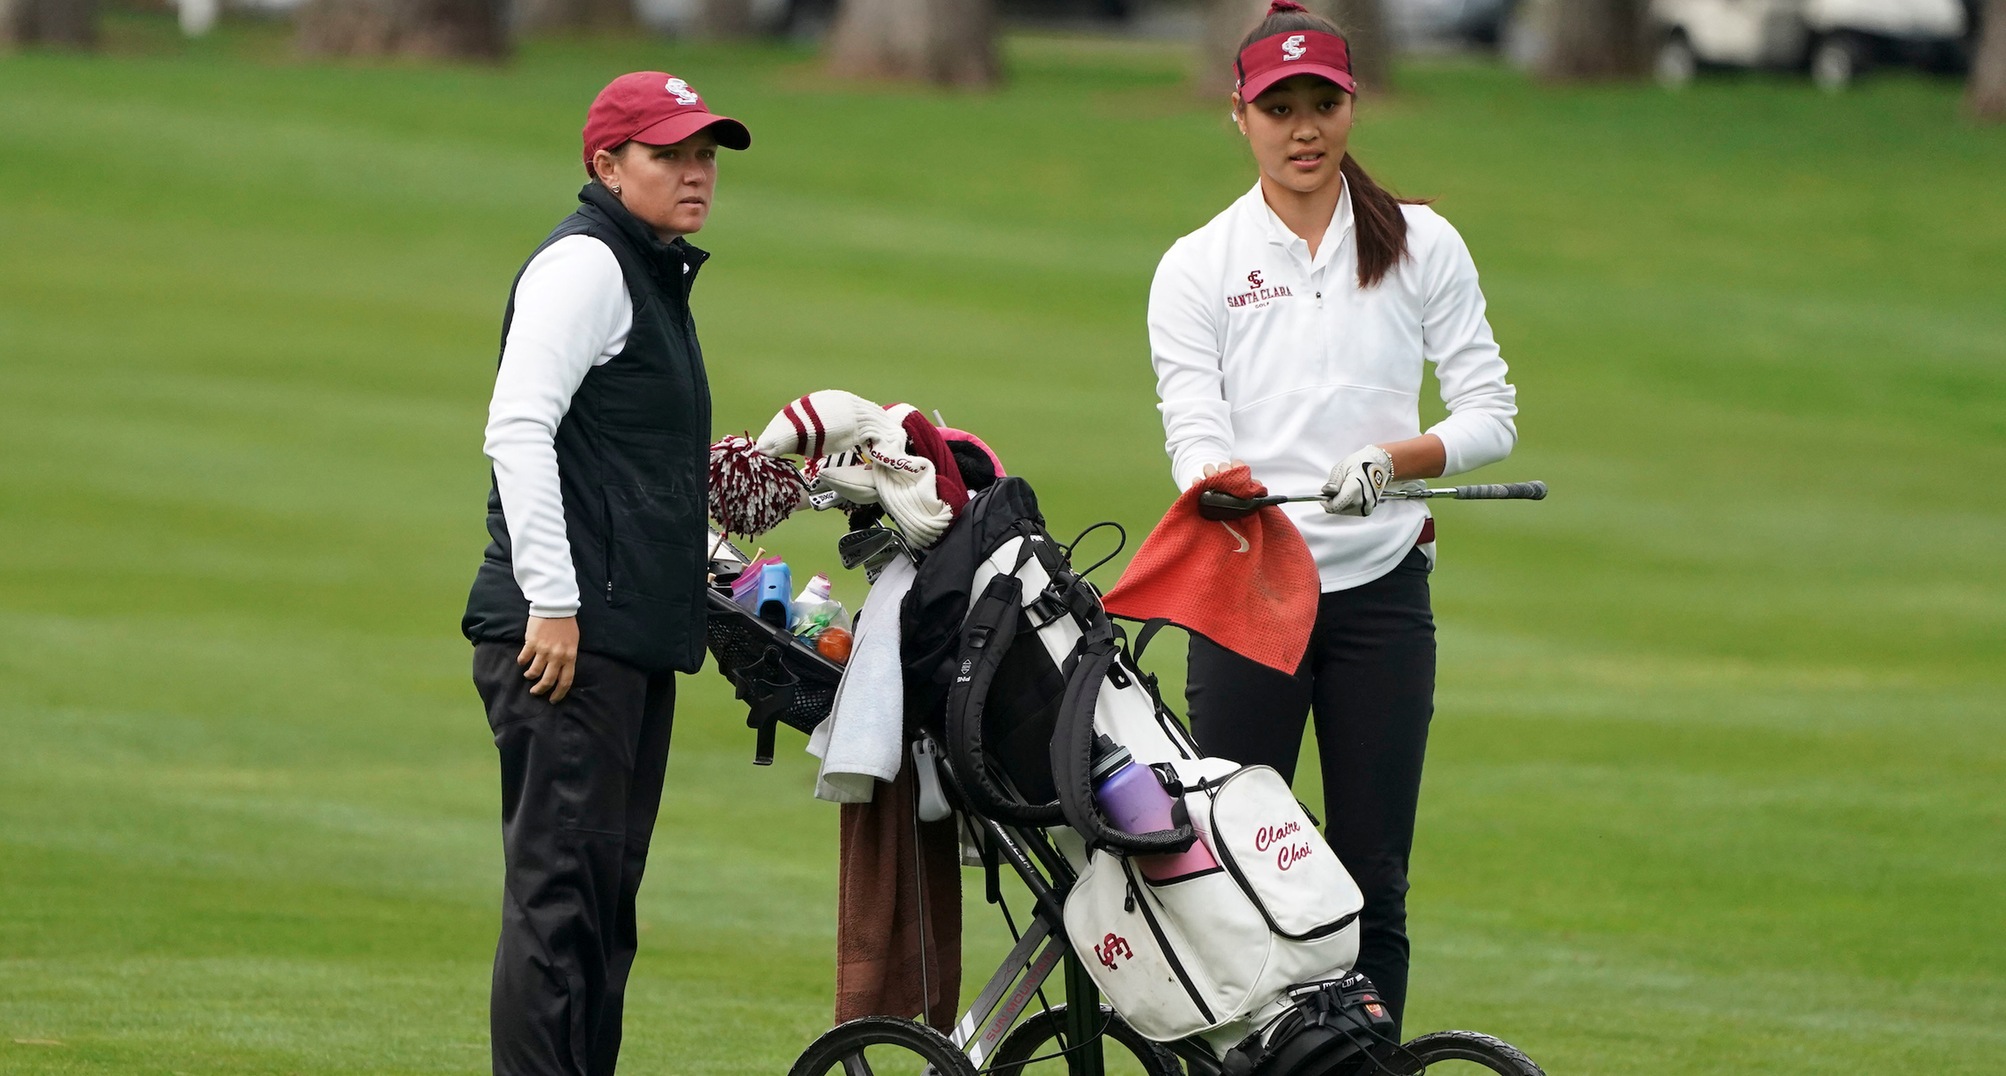 Claire Choi with Krystal Kelly (photo courtesy West Coast Conference)